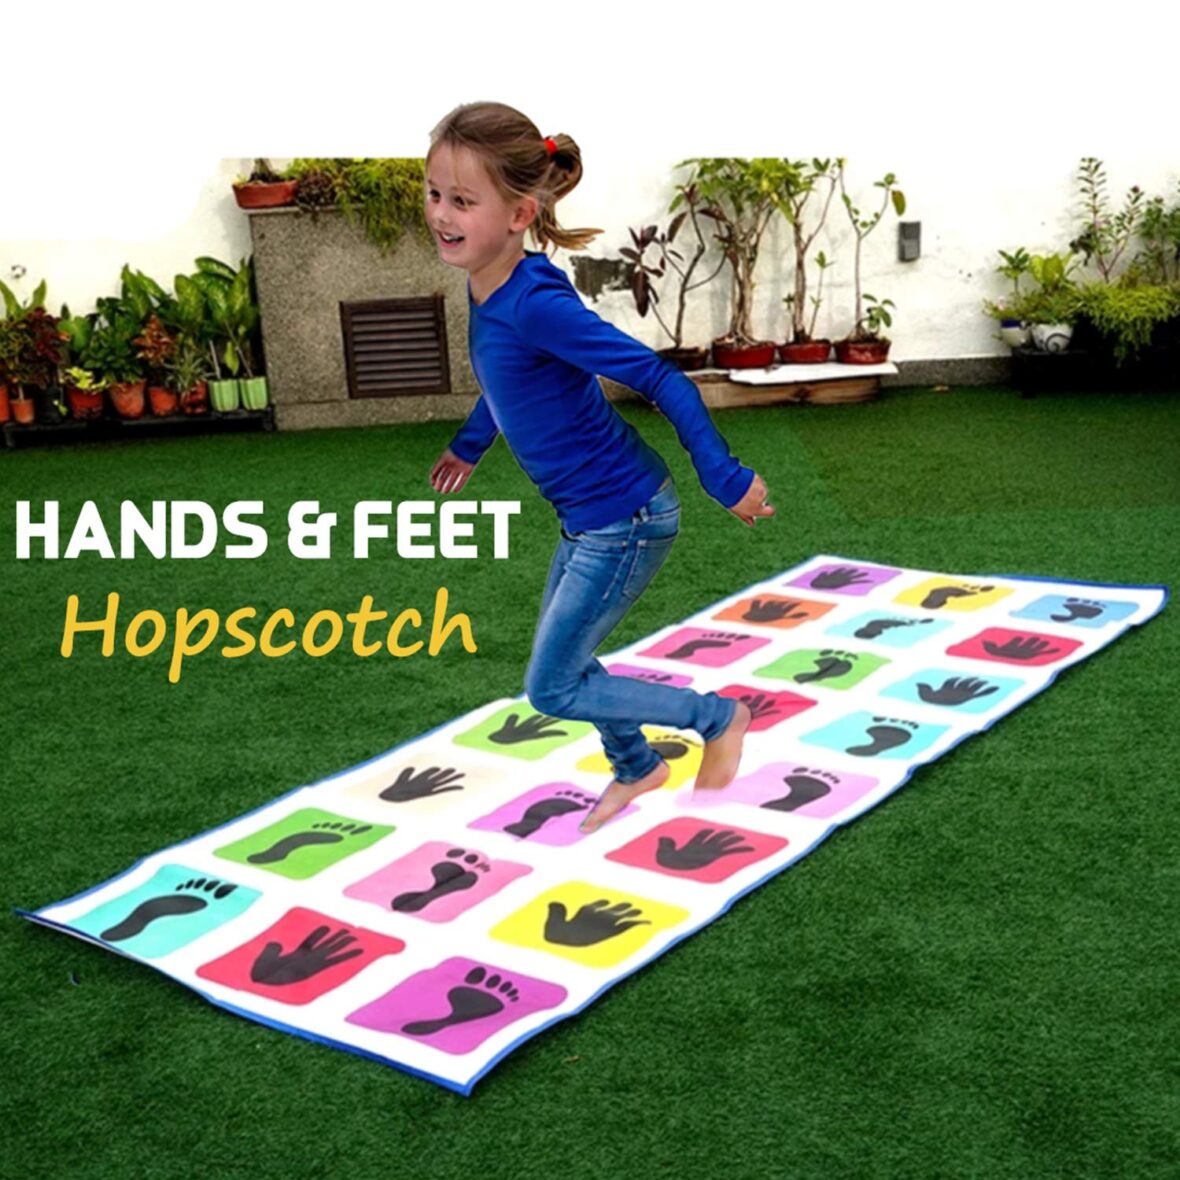 Hopscotch Jumbo Play mat Game (40″ x 108″) – Hopscotch Game an Unique Balancing Game for Kids n Adults, Family Game, for 3 Years and Up – Multicolor